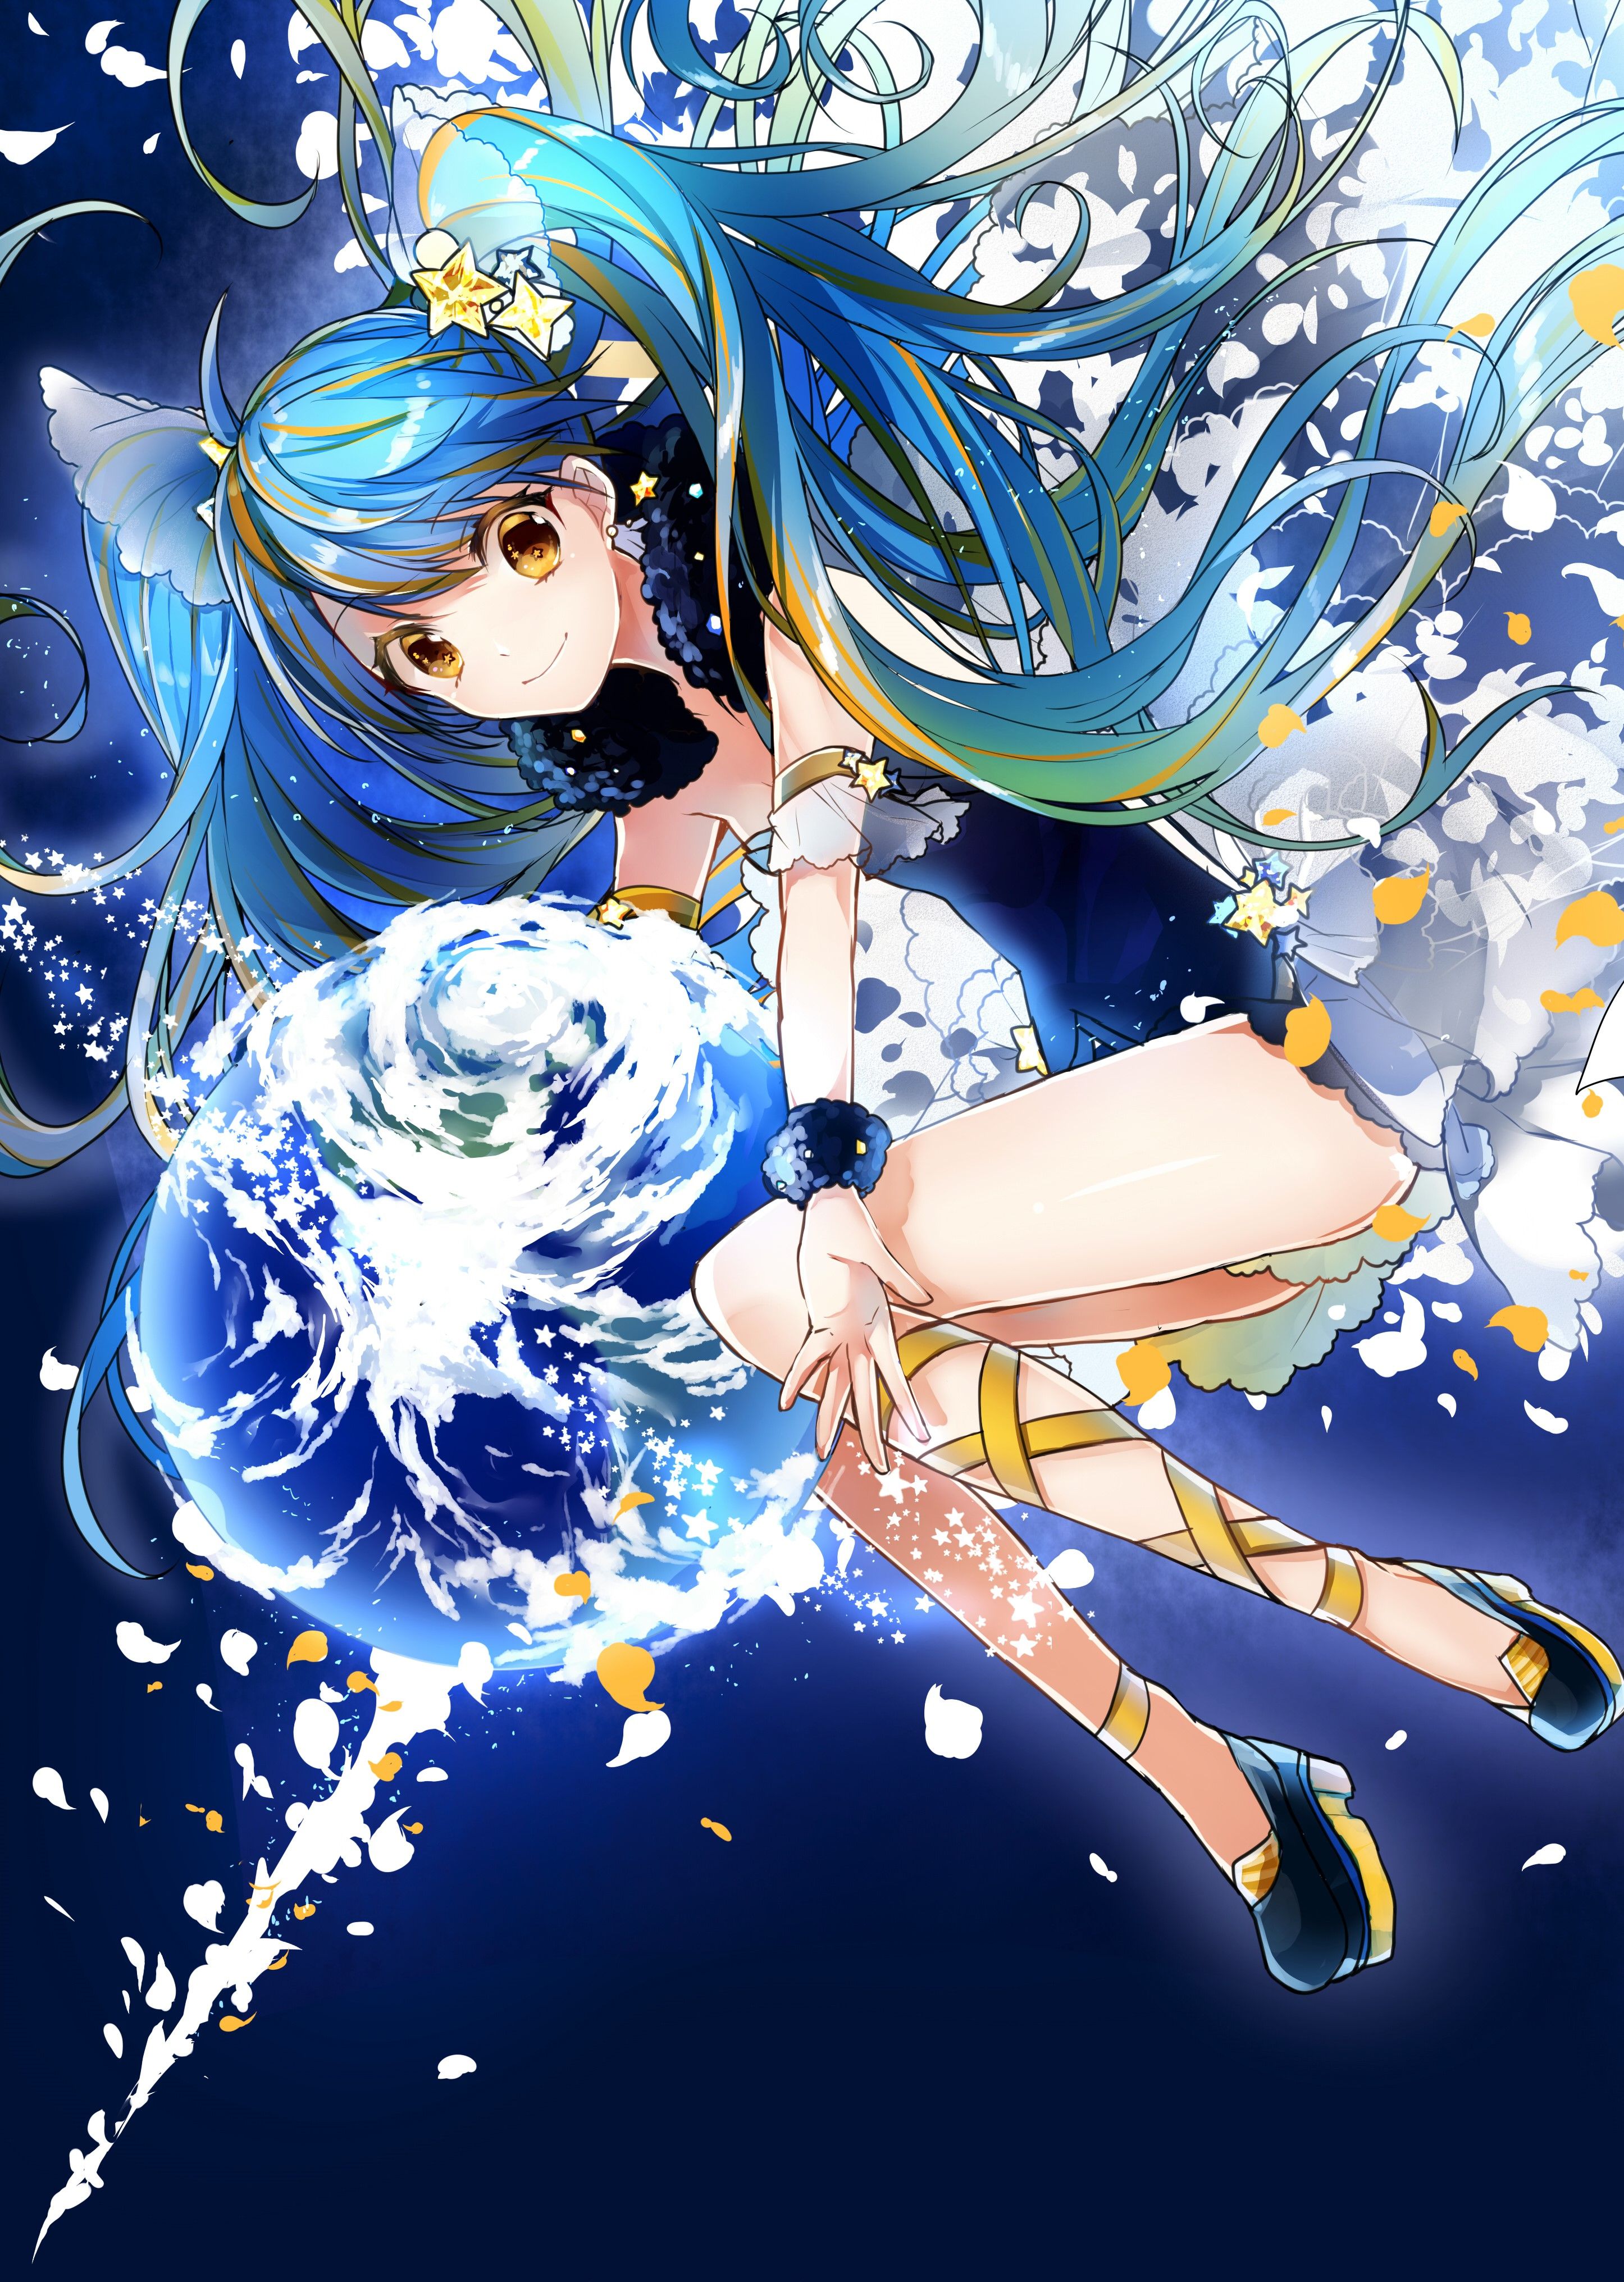 Assorted Miku images after a long absence. 23